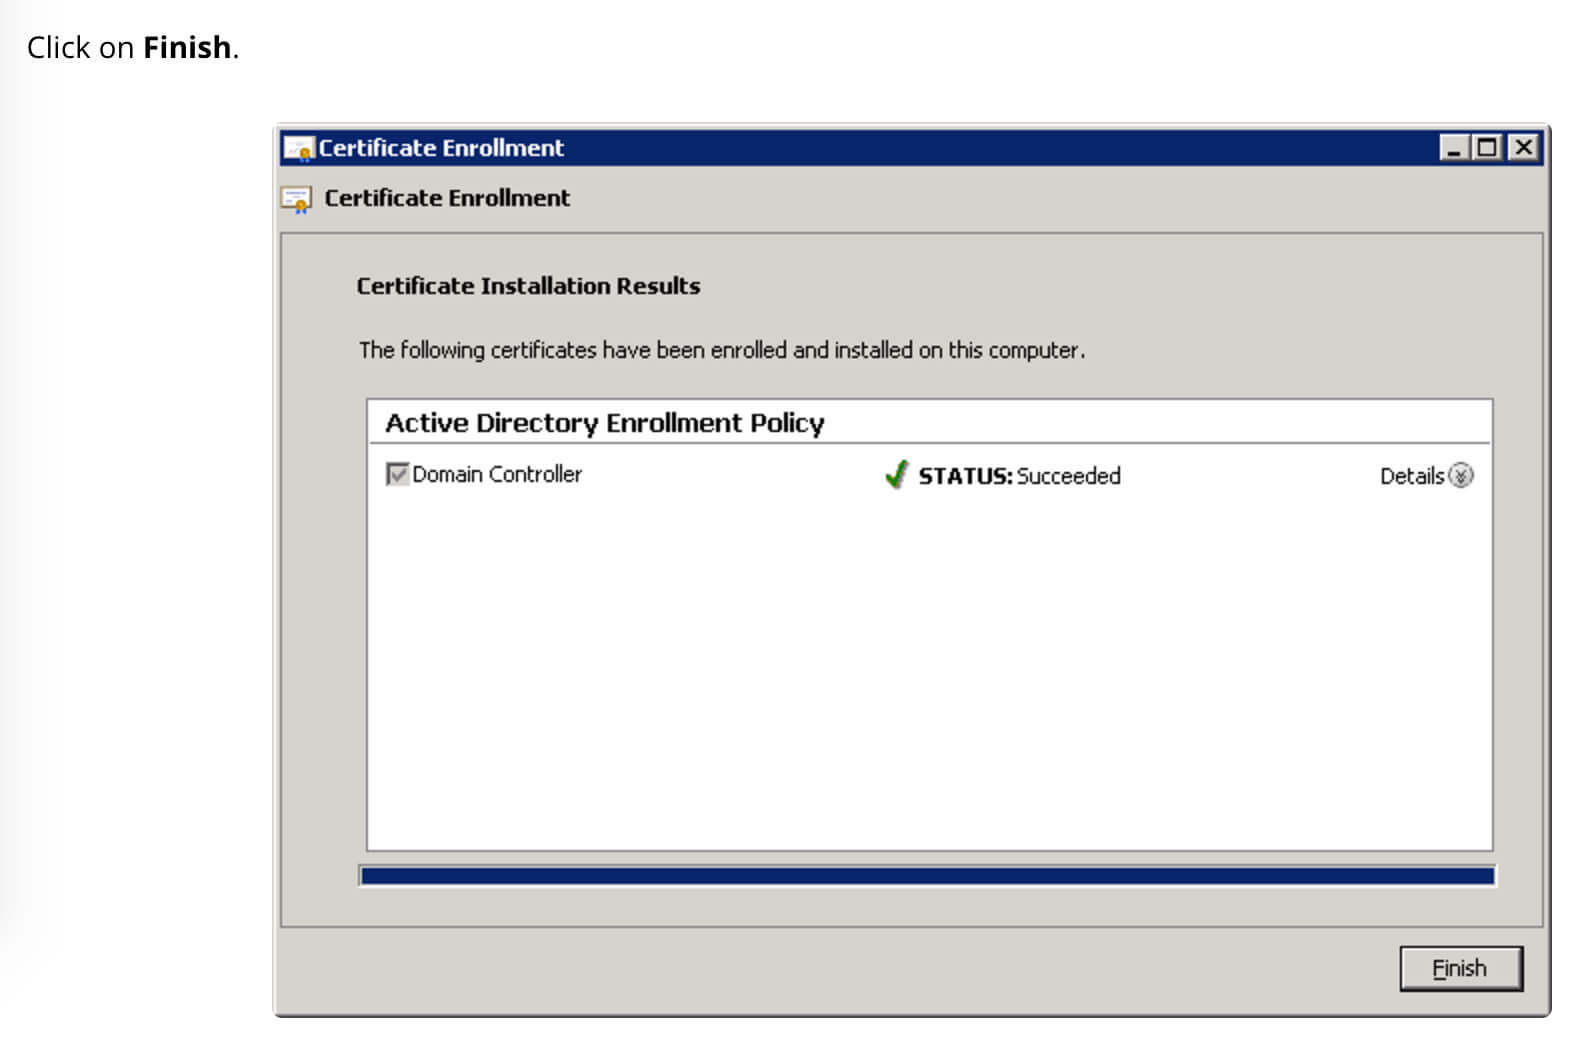 Workstation Authentication Certificate Template ] - Netwrix Intended For Workstation Authentication Certificate Template